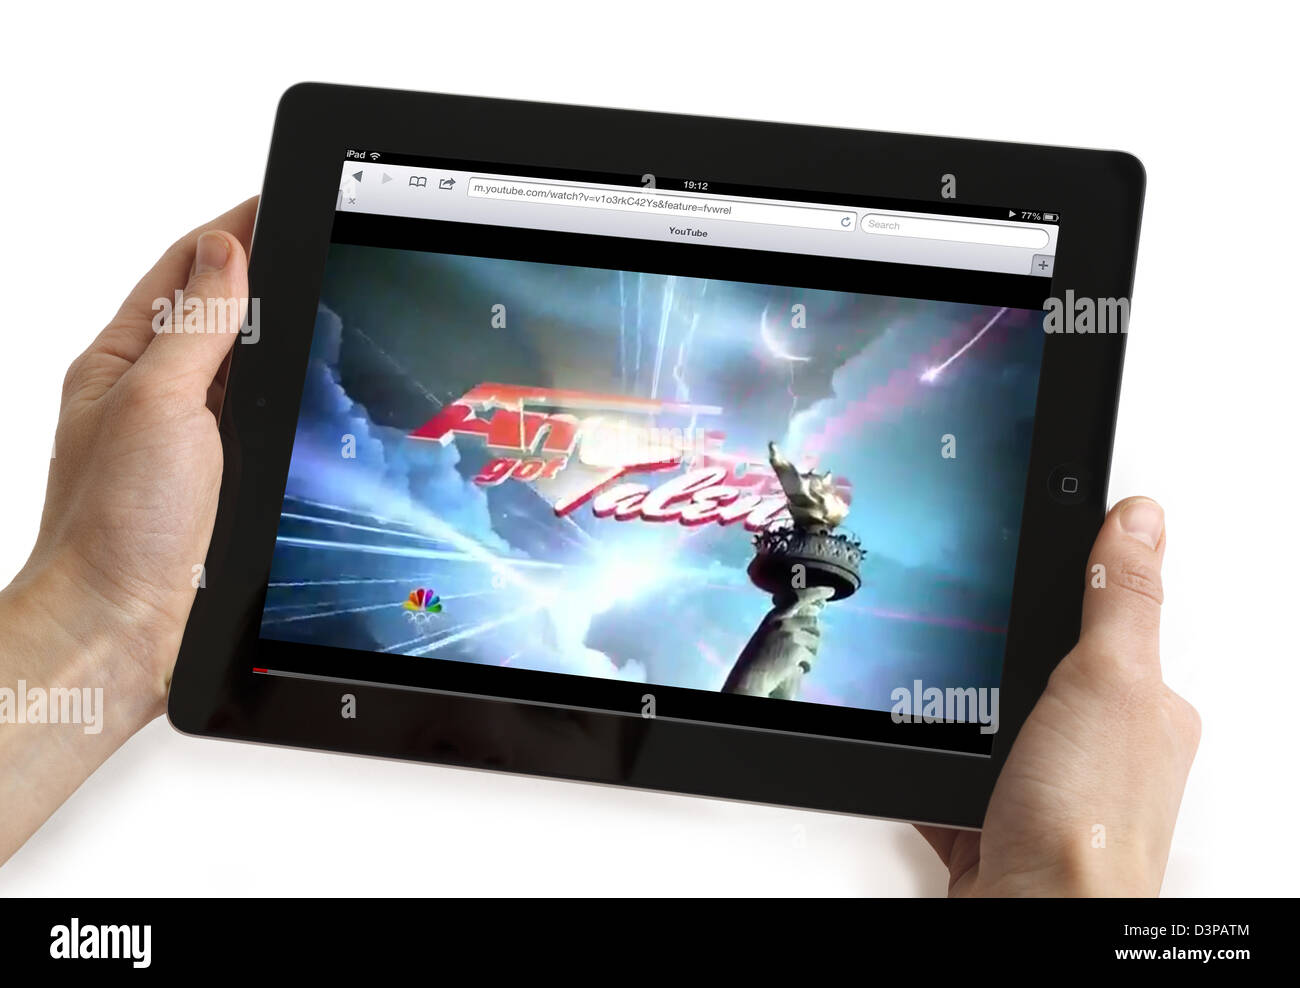 Watching a streaming video of America's Got Talent on YouTube on an iPad Stock Photo